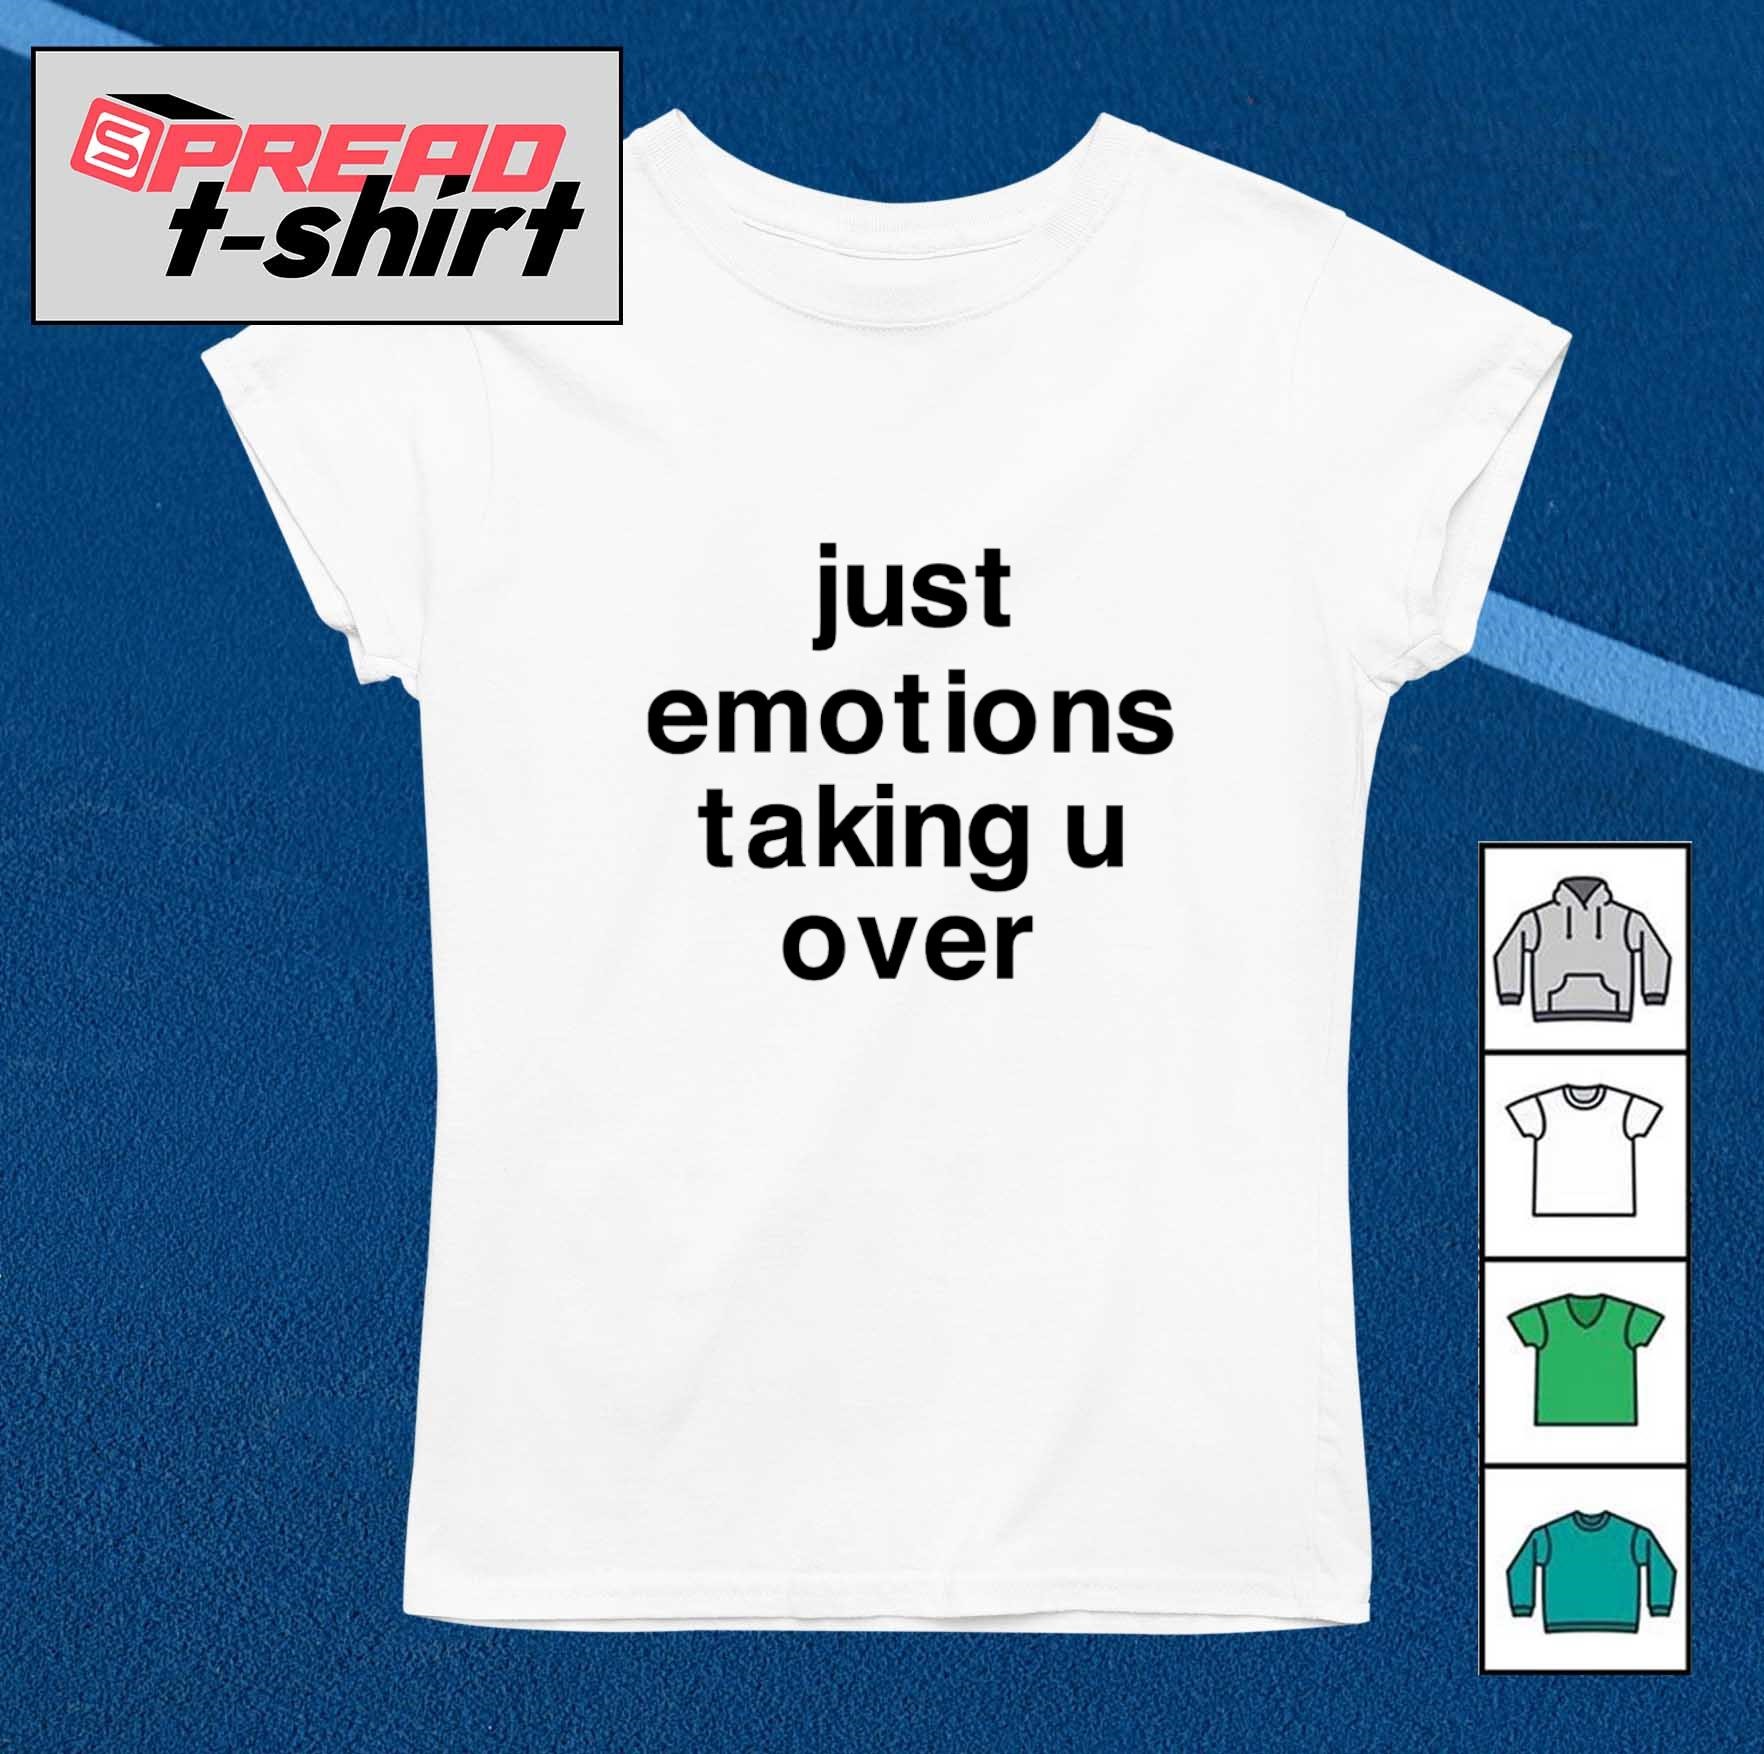 Just emotions taking u over shirt, by Apparelaholic